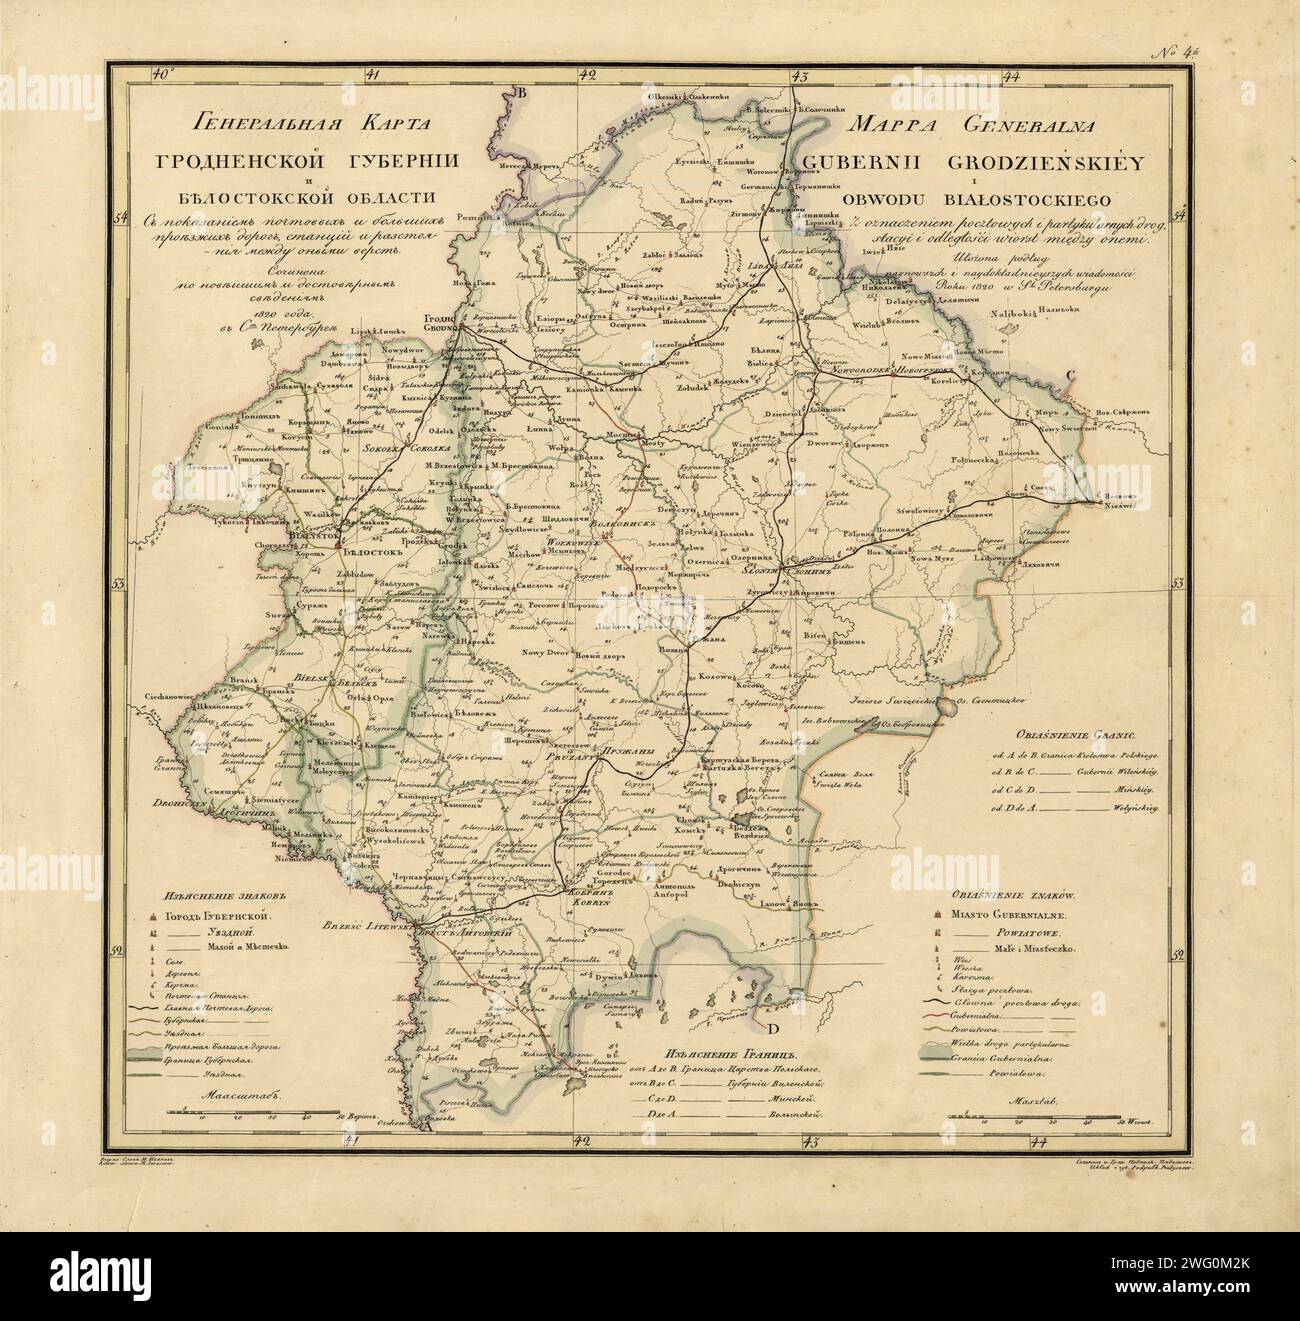 General Map of Grodno Province and the Belostok Region: Showing Postal and Major Roads, Stations and the Distance in Versts between Them, 1820. This 1820 map of Grodno Province and the Belostok region is from a larger work,Geograficheskii atlas Rossiiskoi imperii, tsarstva Pol'skogo i velikogo kniazhestva Finliandskogo (Geographical atlas of the Russian Empire, the Kingdom of Poland, and the Grand Duchy of Finland), containing 60 maps of the Russian Empire. Compiled and engraved by Colonel V.P. Piadyshev, it reflects the detailed mapping carried out by Russian military cartographers in the fir Stock Photo